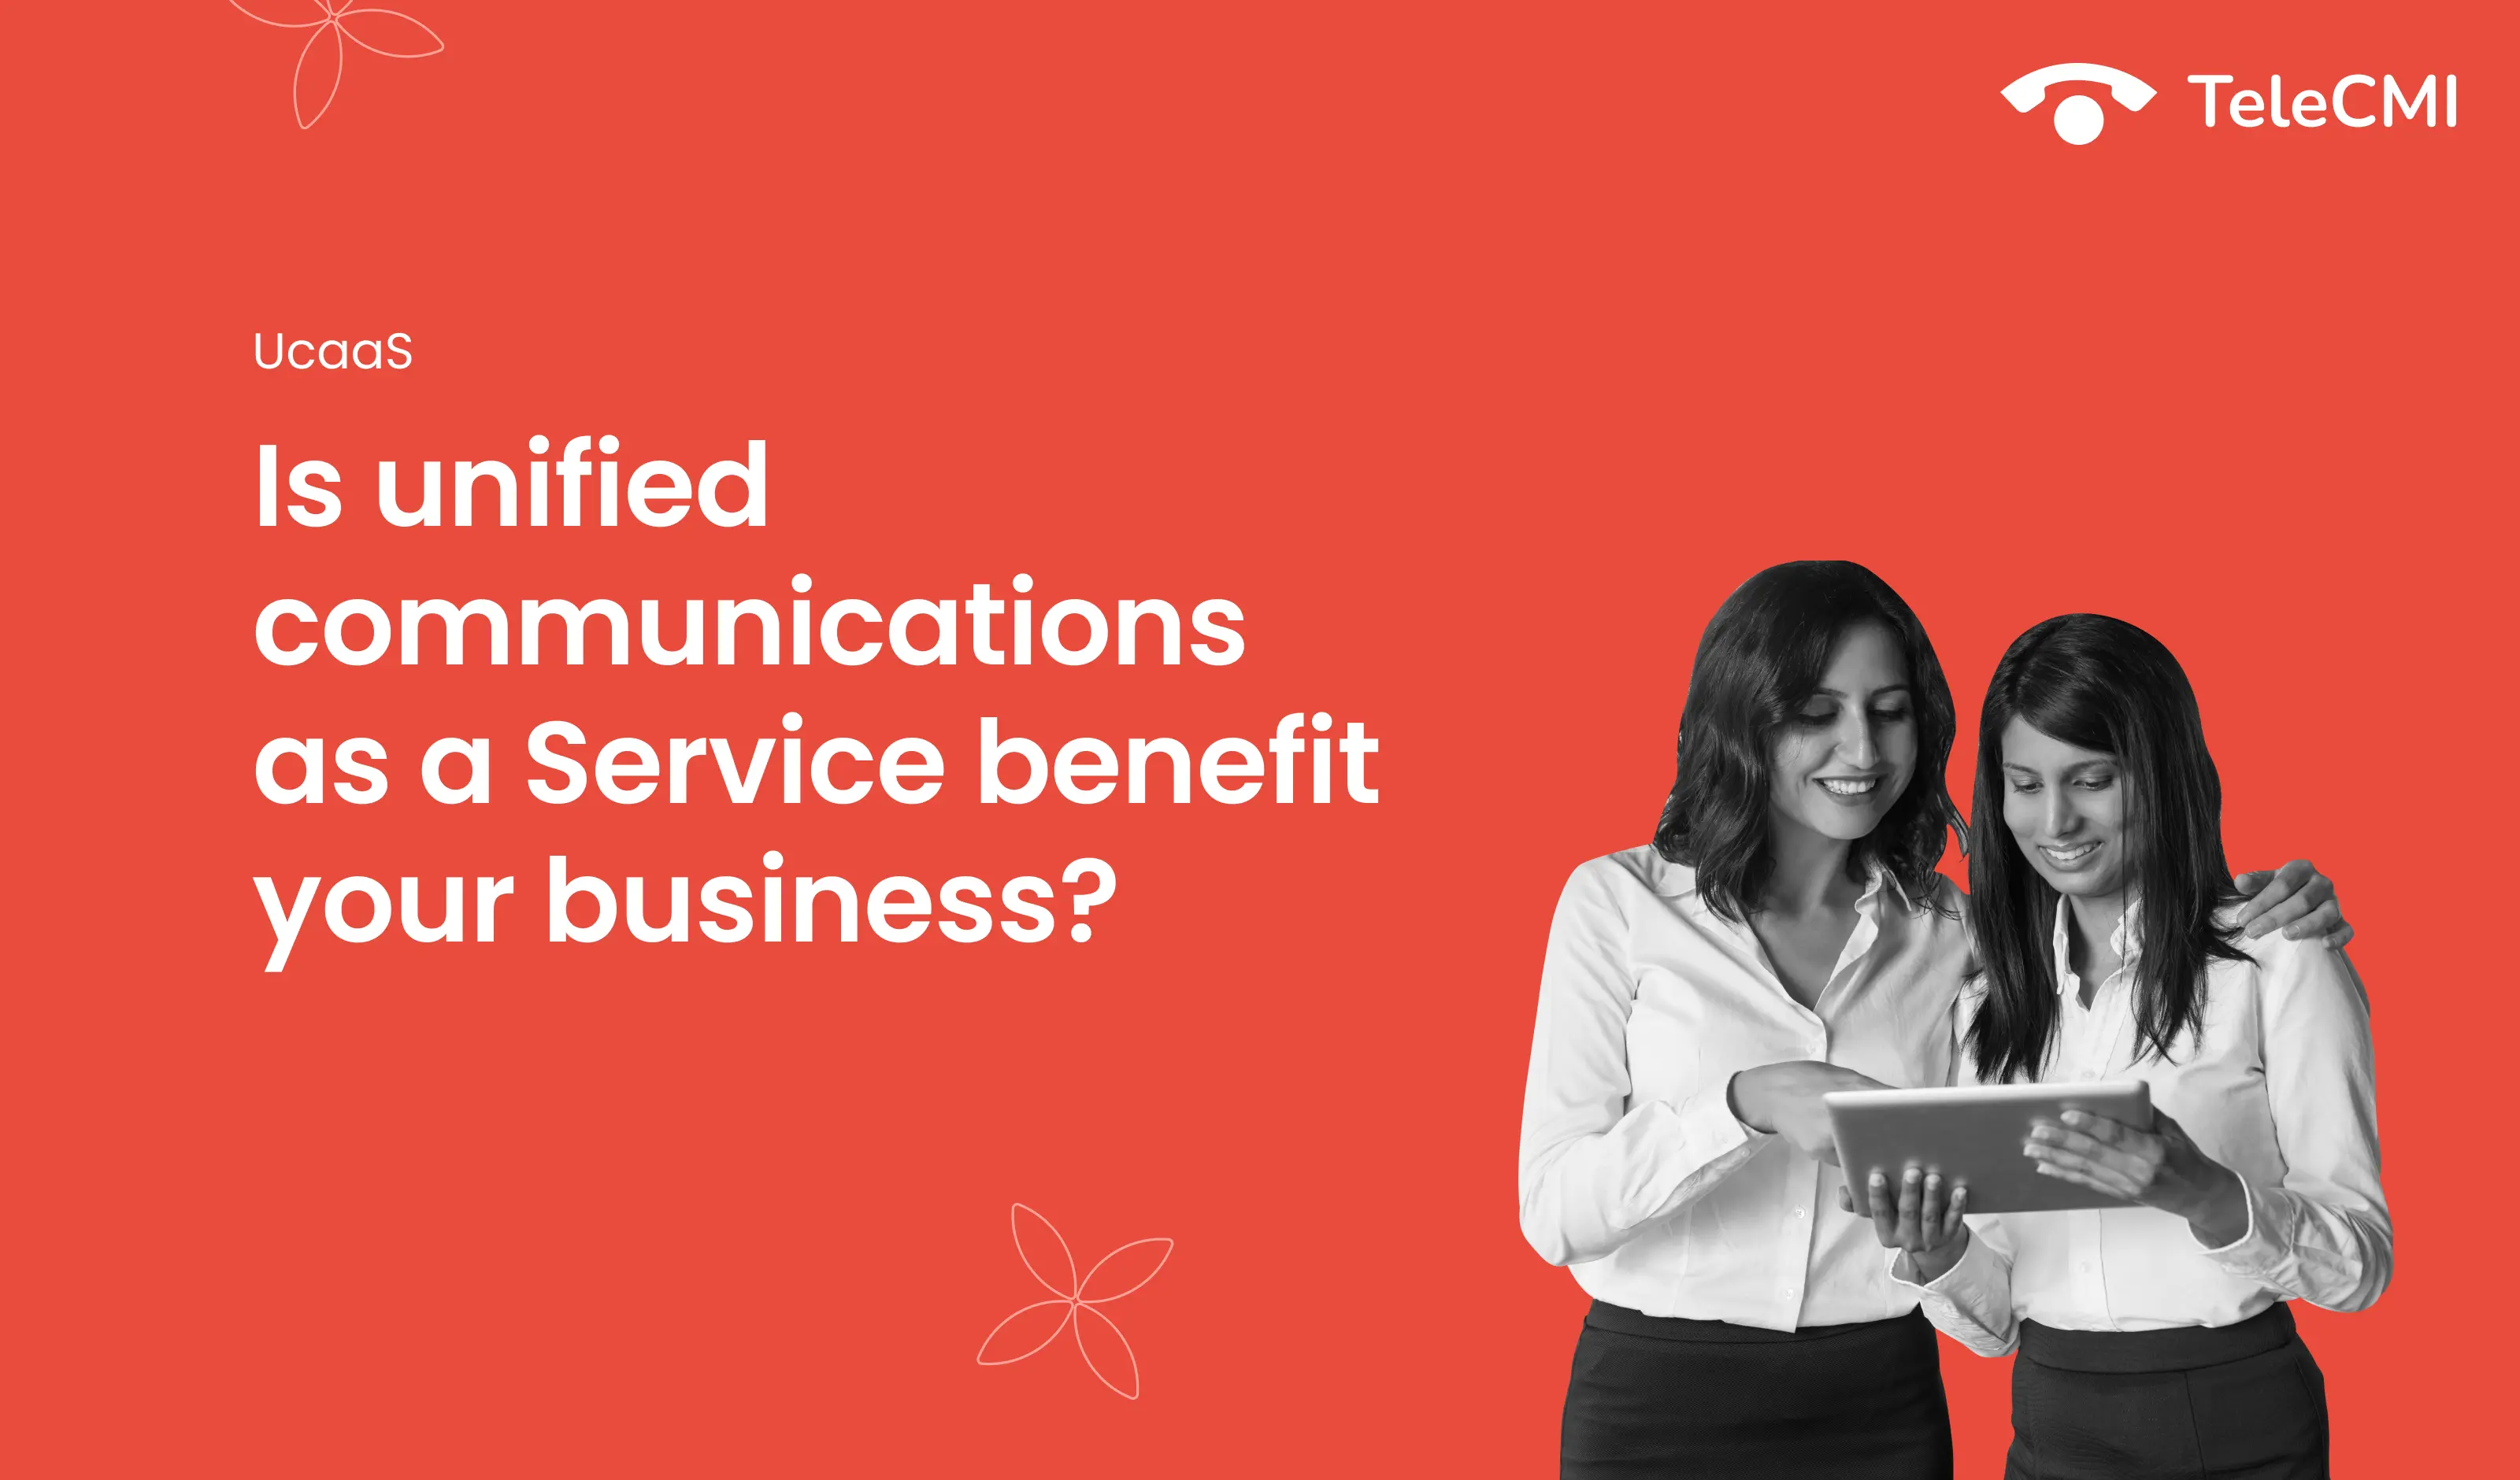 Is Unified Communications as a Service (UCaaS) Benefit Your Business Communication?